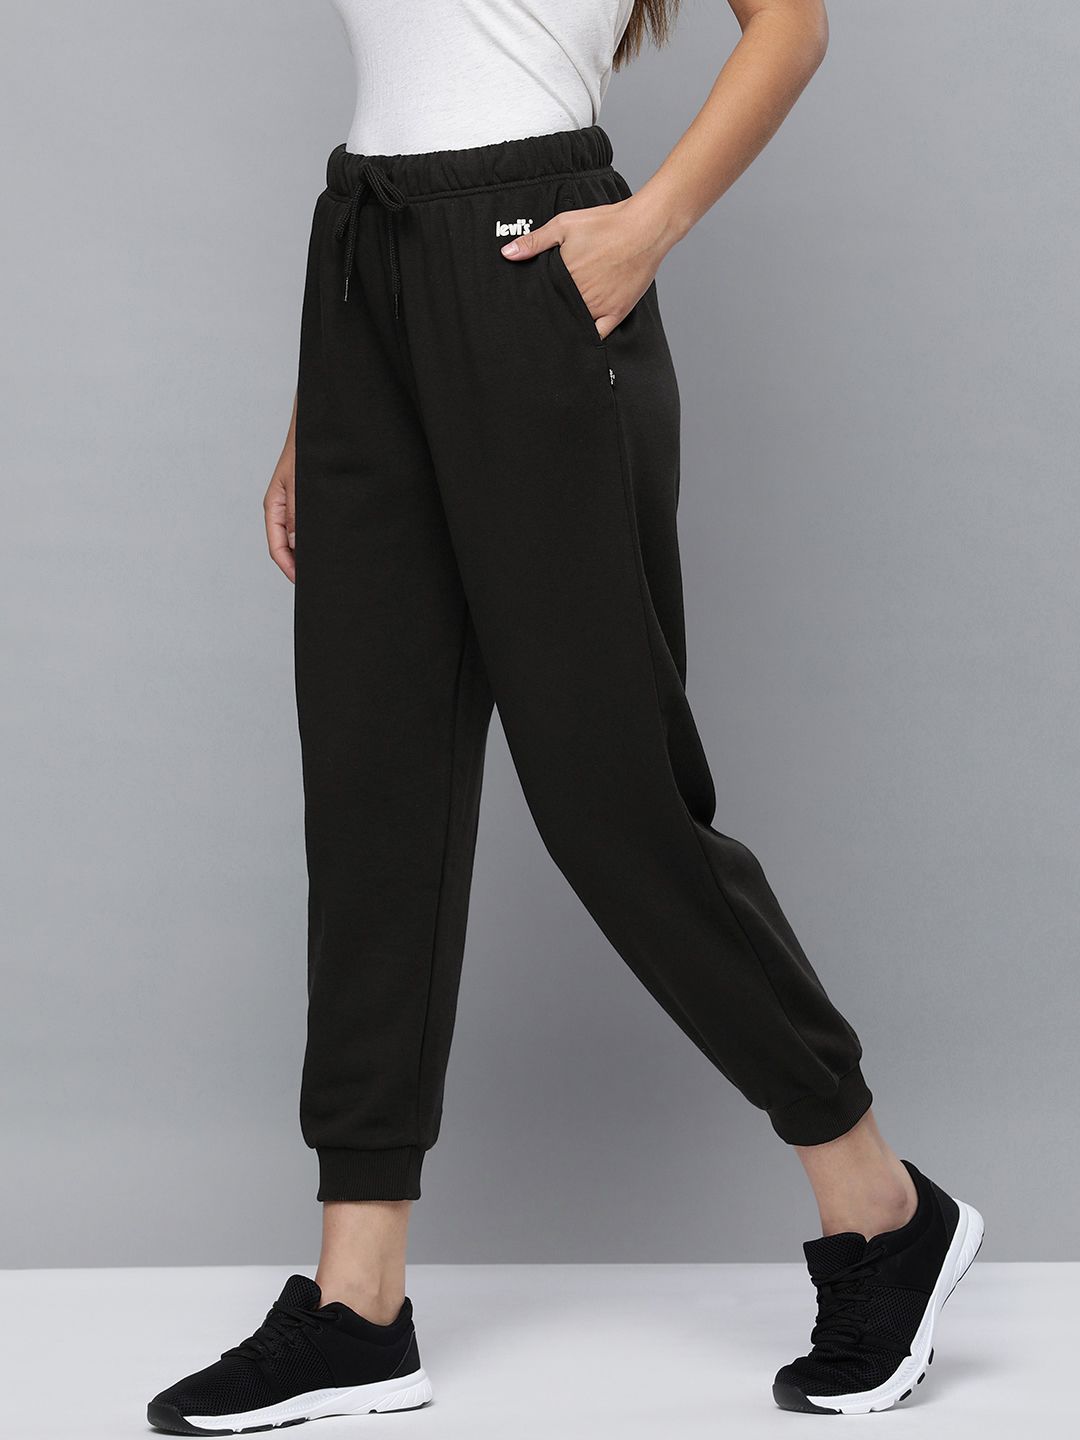 Levis Women Black Solid Joggers Price in India